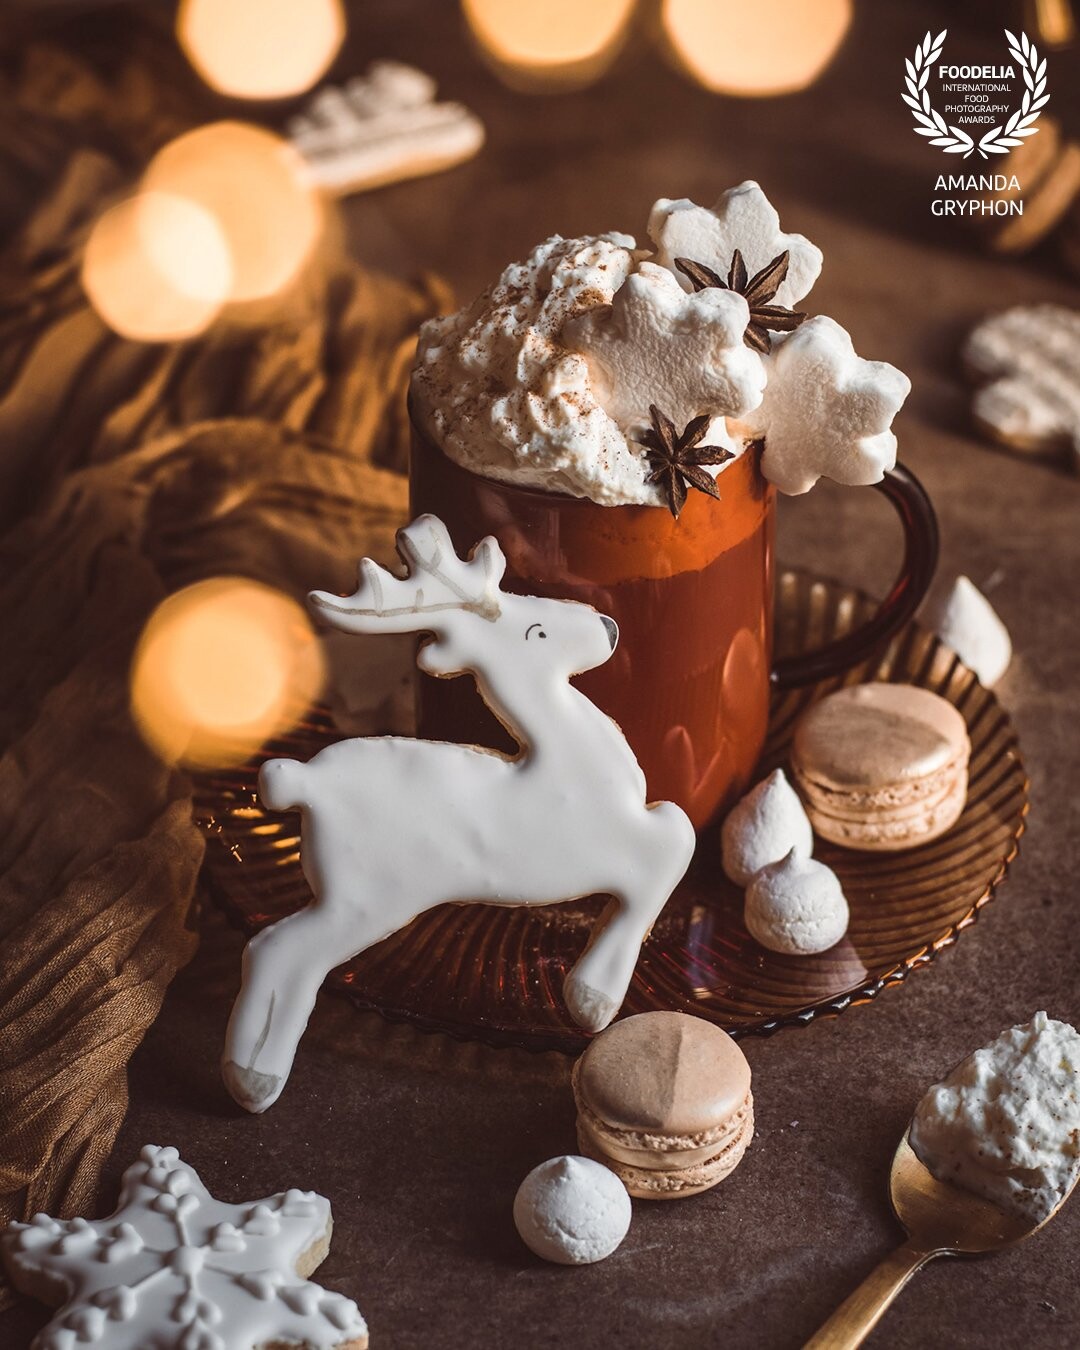 A cozy sugar cookie latte piled high with whipped cream and marshmallows called for a touch of festive bokeh, made possible by a thin thread of fairy lights held in the foreground.